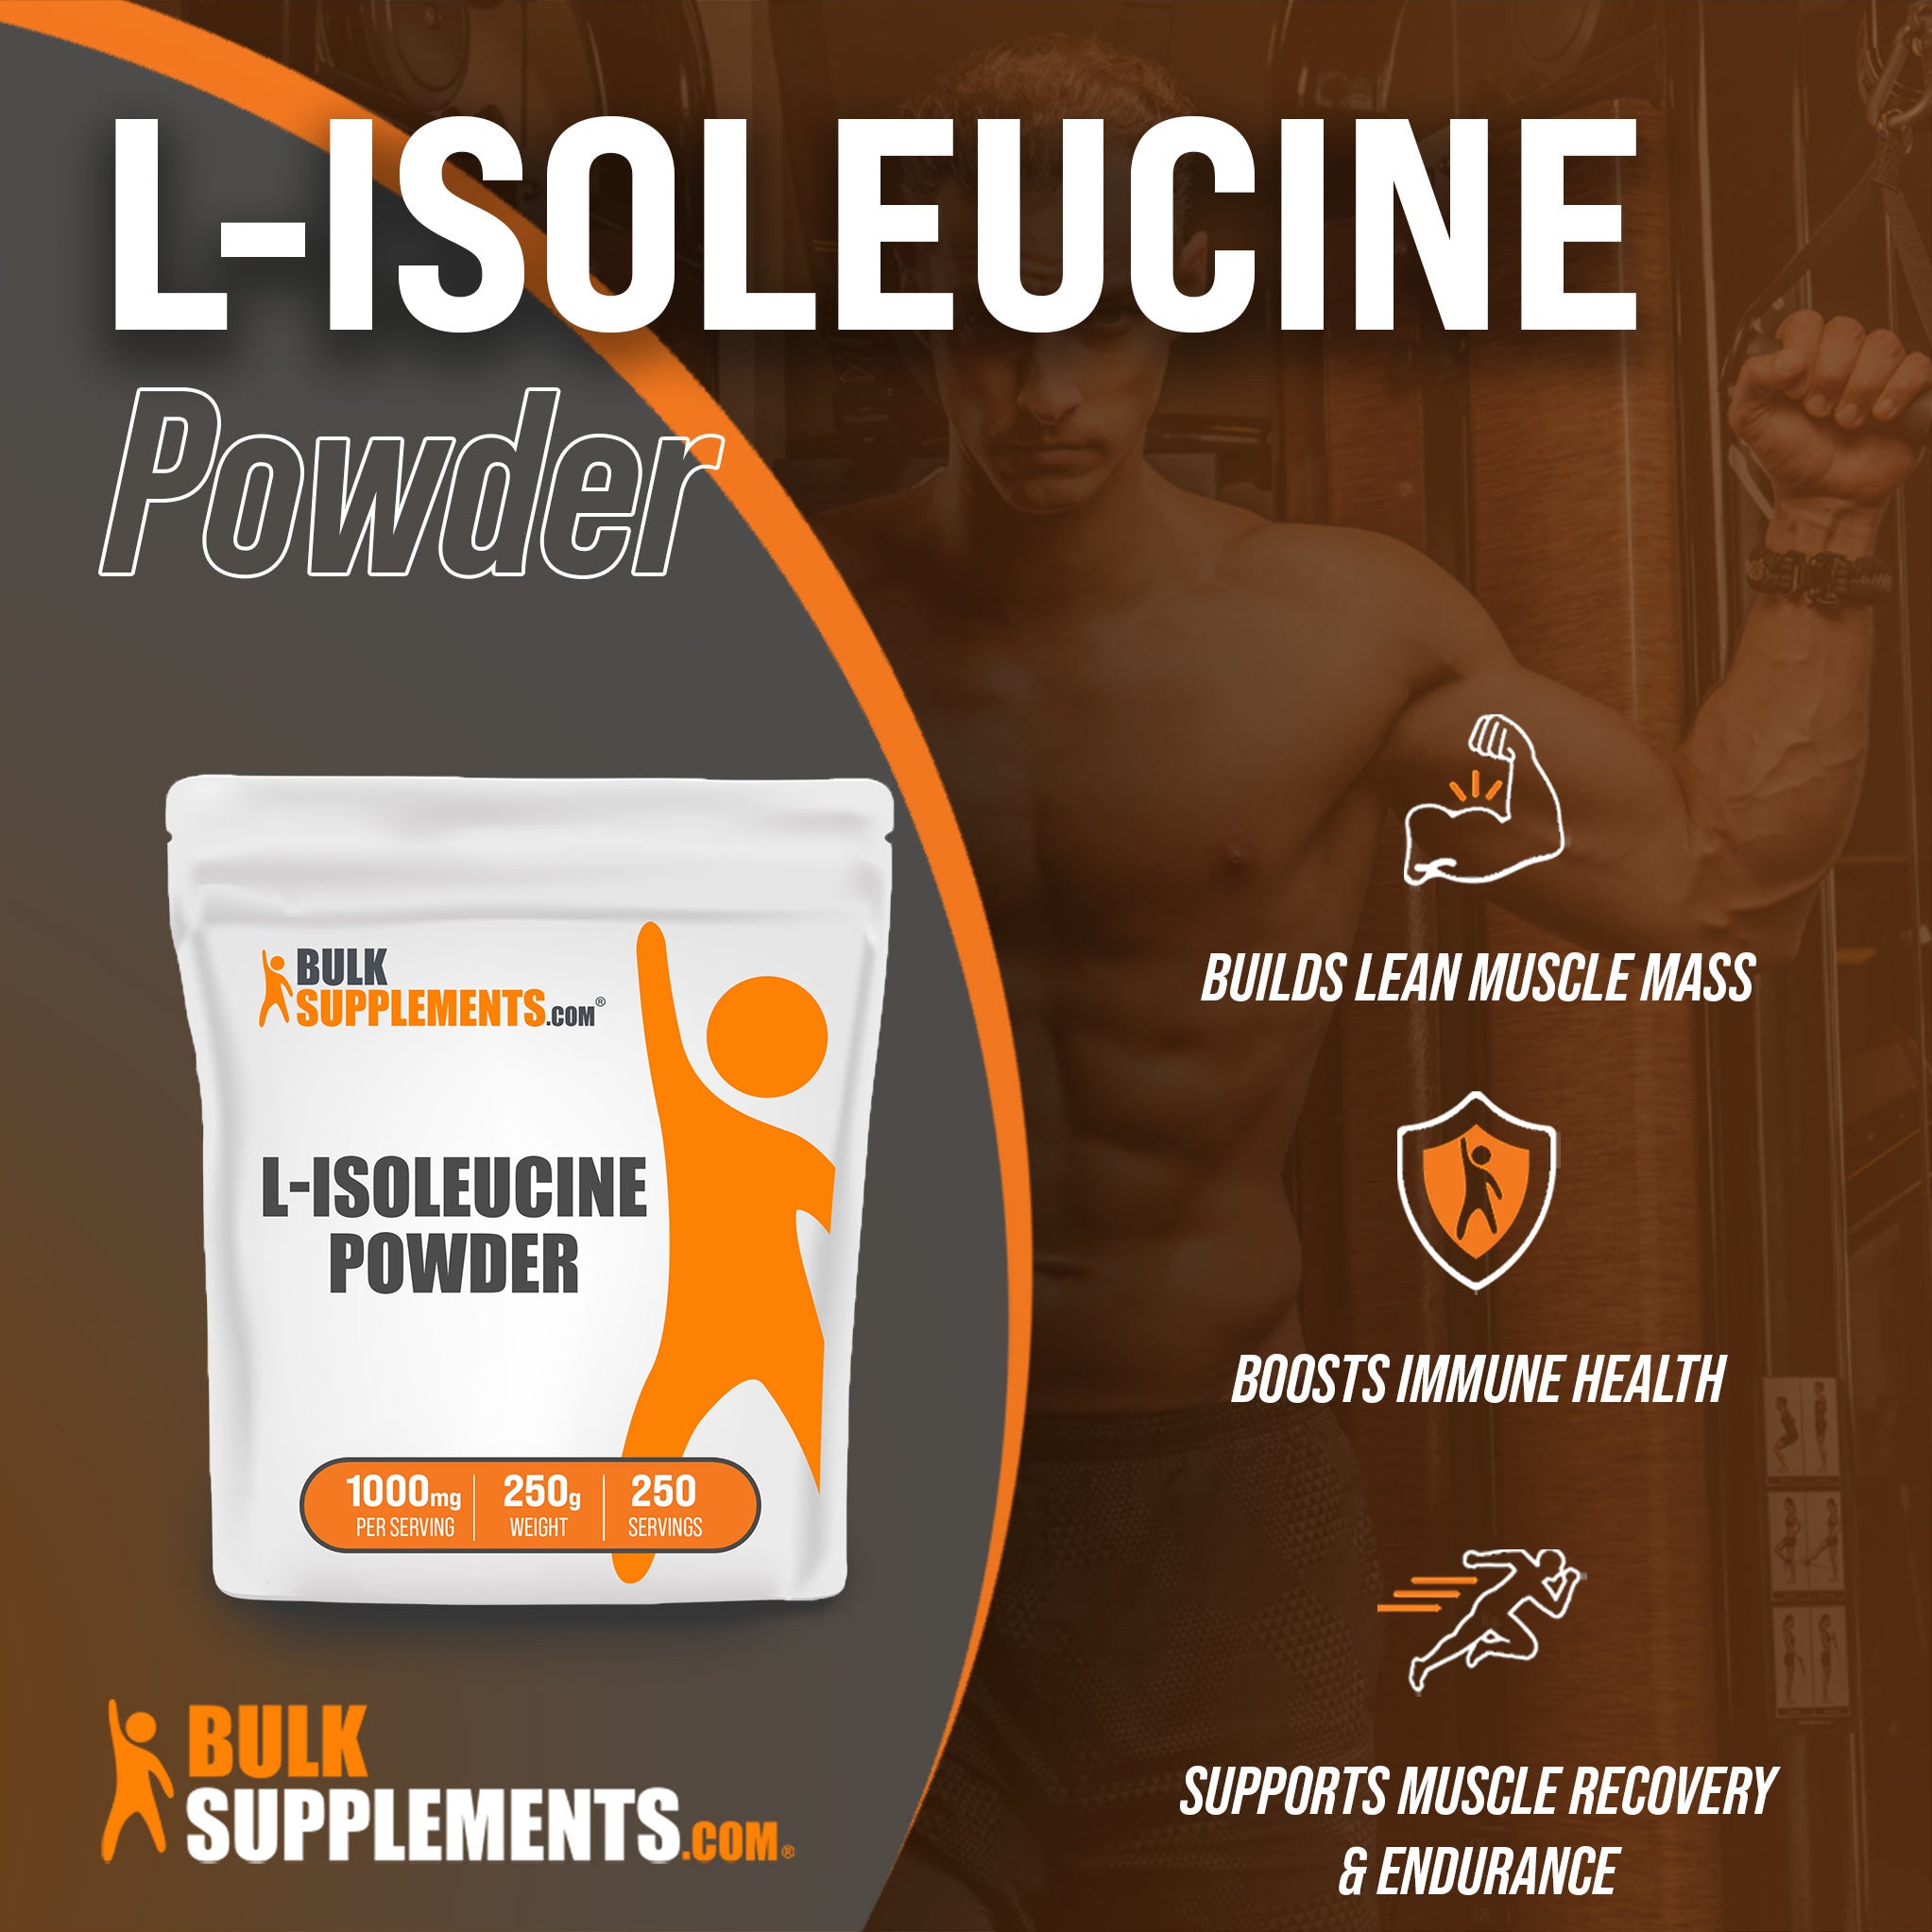 Benefits of L-Isoleucine: builds lean muscle mass, boosts immune health, supports muscle recovery and endurance